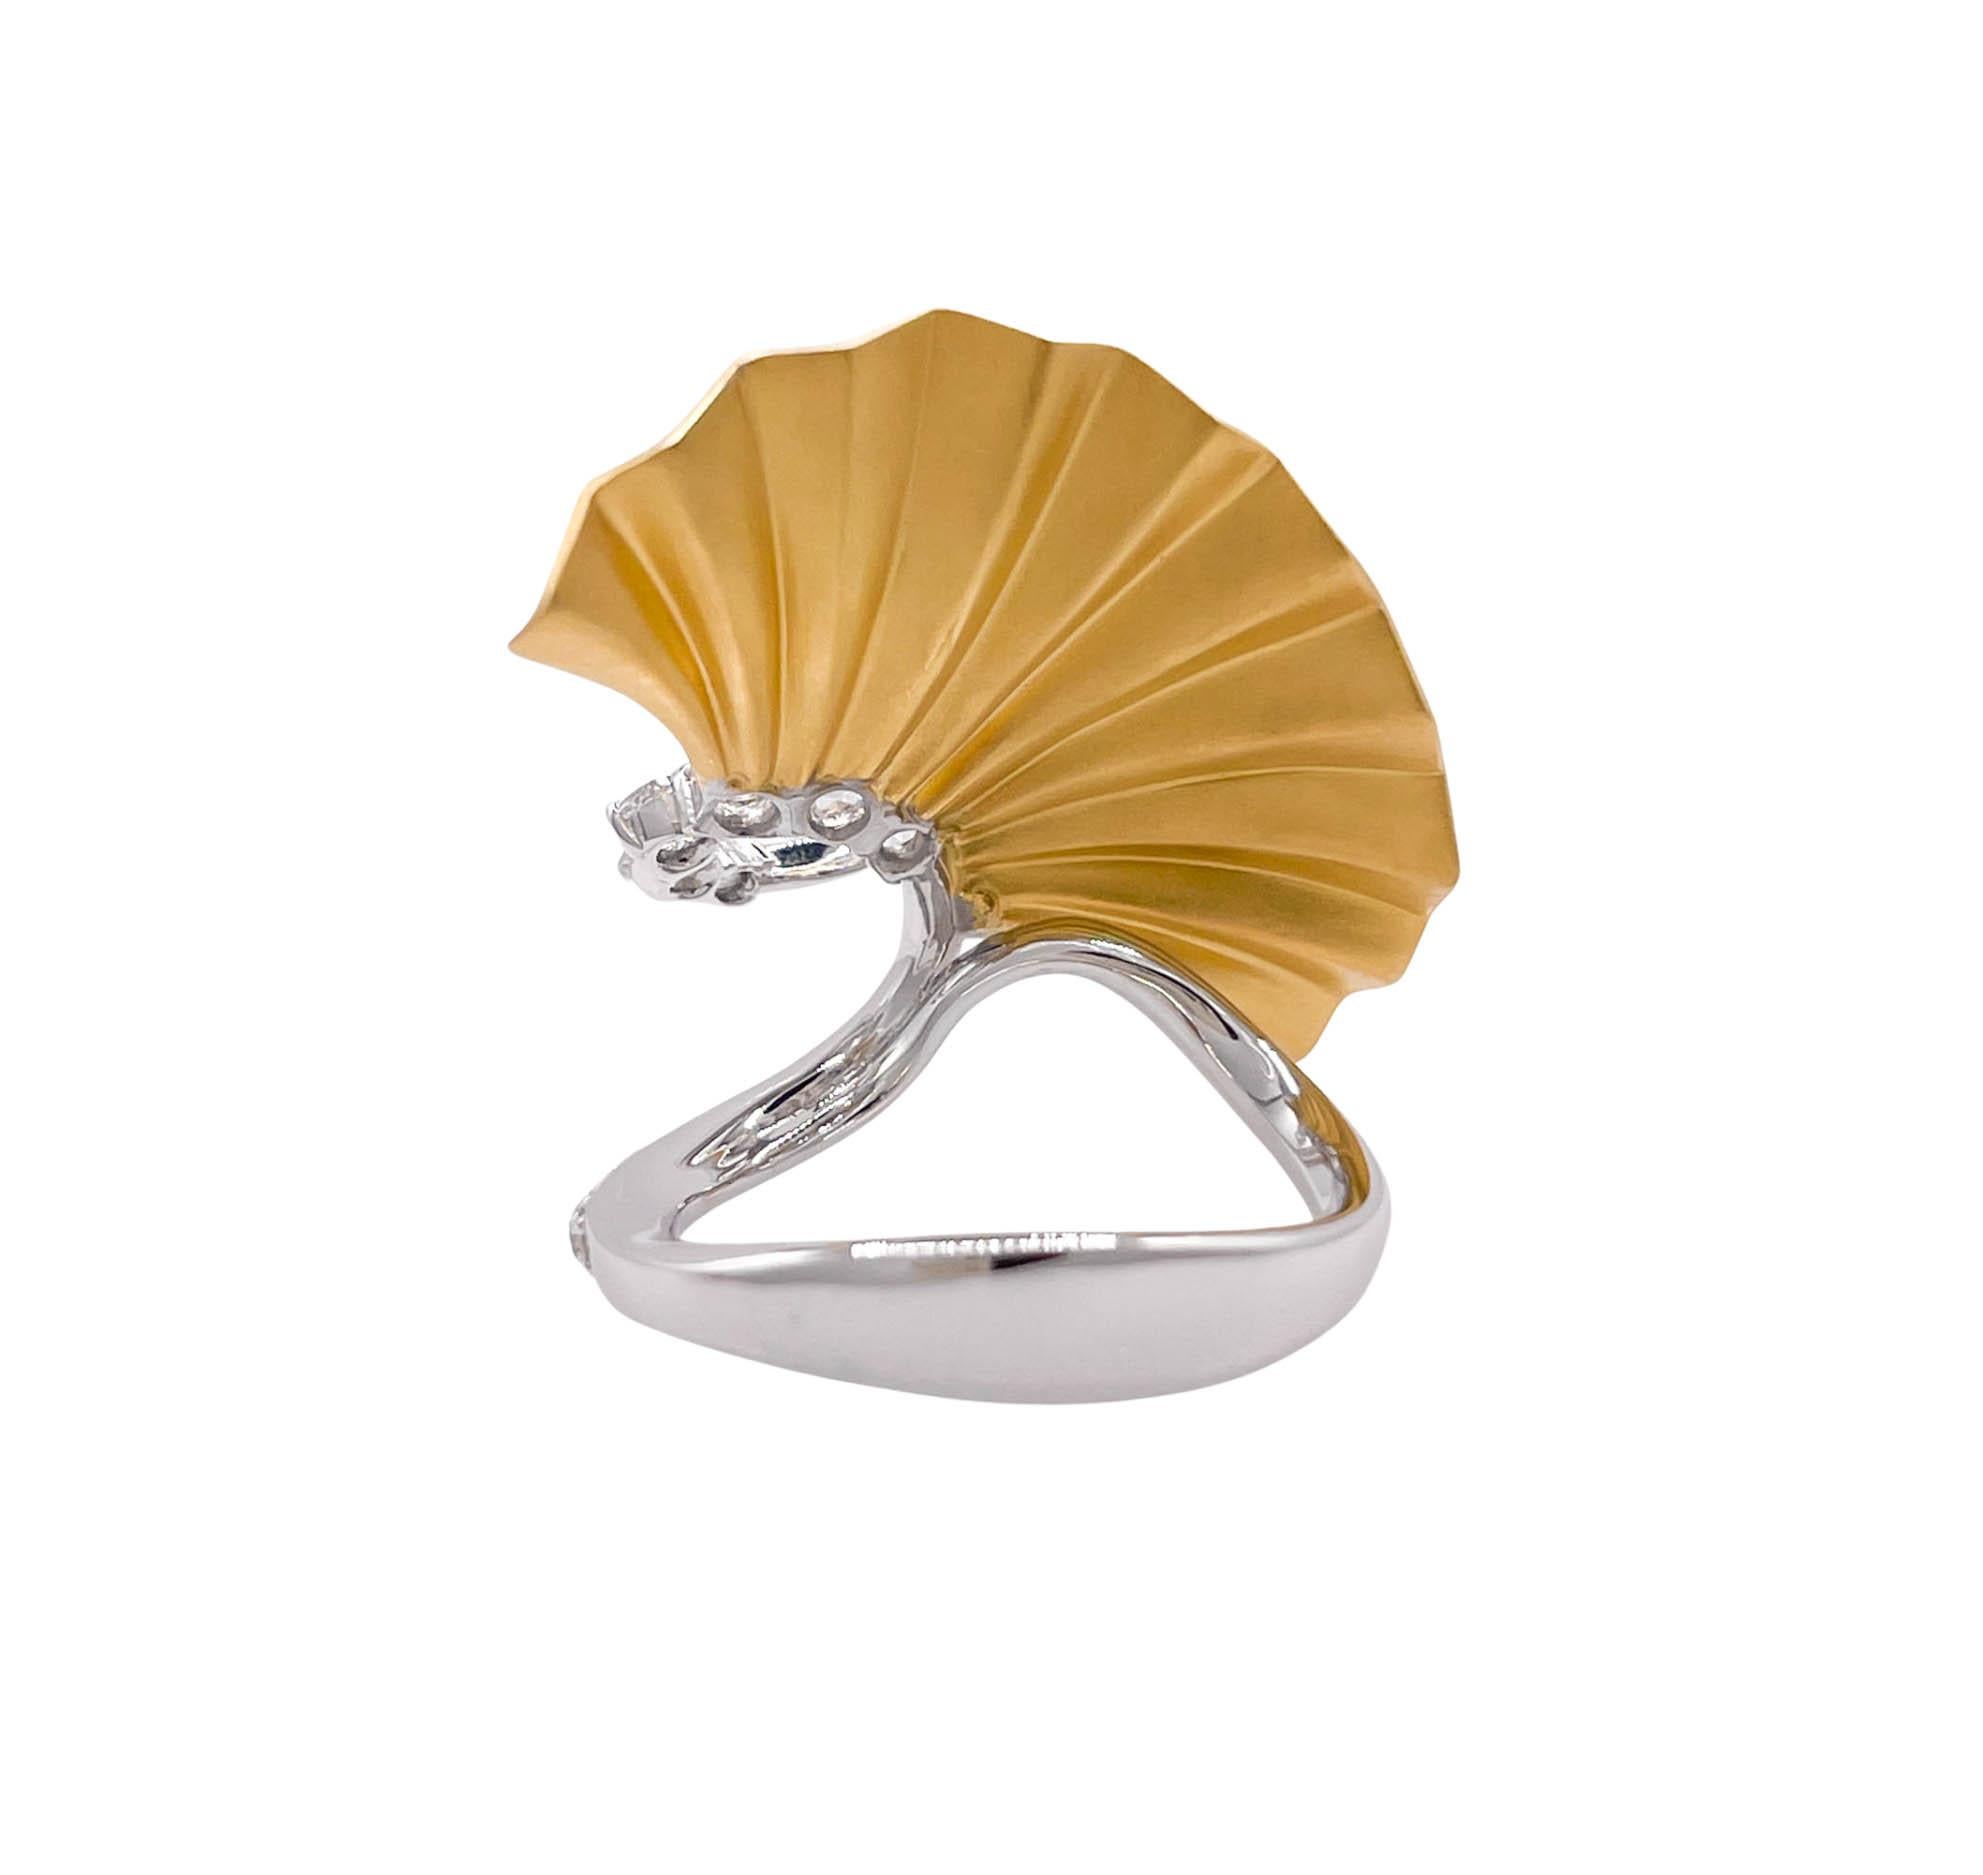 Jay Feder 18k Two Tone Gold Diamond Fan Plisse Ring  In Good Condition For Sale In Boca Raton, FL